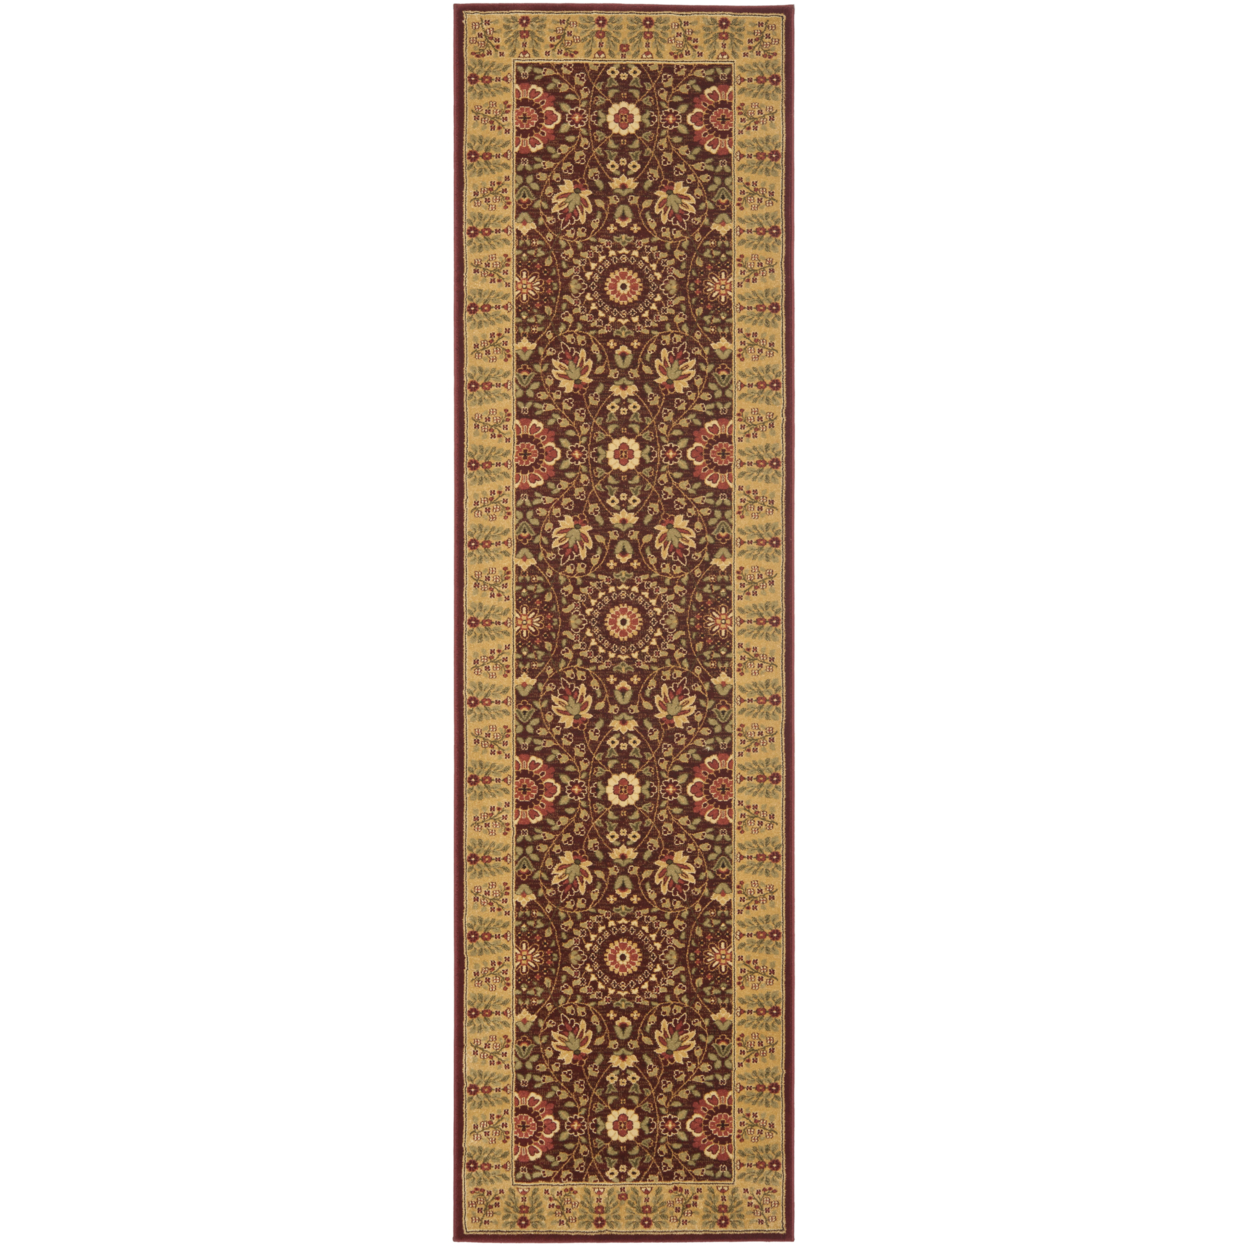 SAFAVIEH Treasures Collection TRE215-4022 Red/Caramel Rug - 2' 2 X 8'